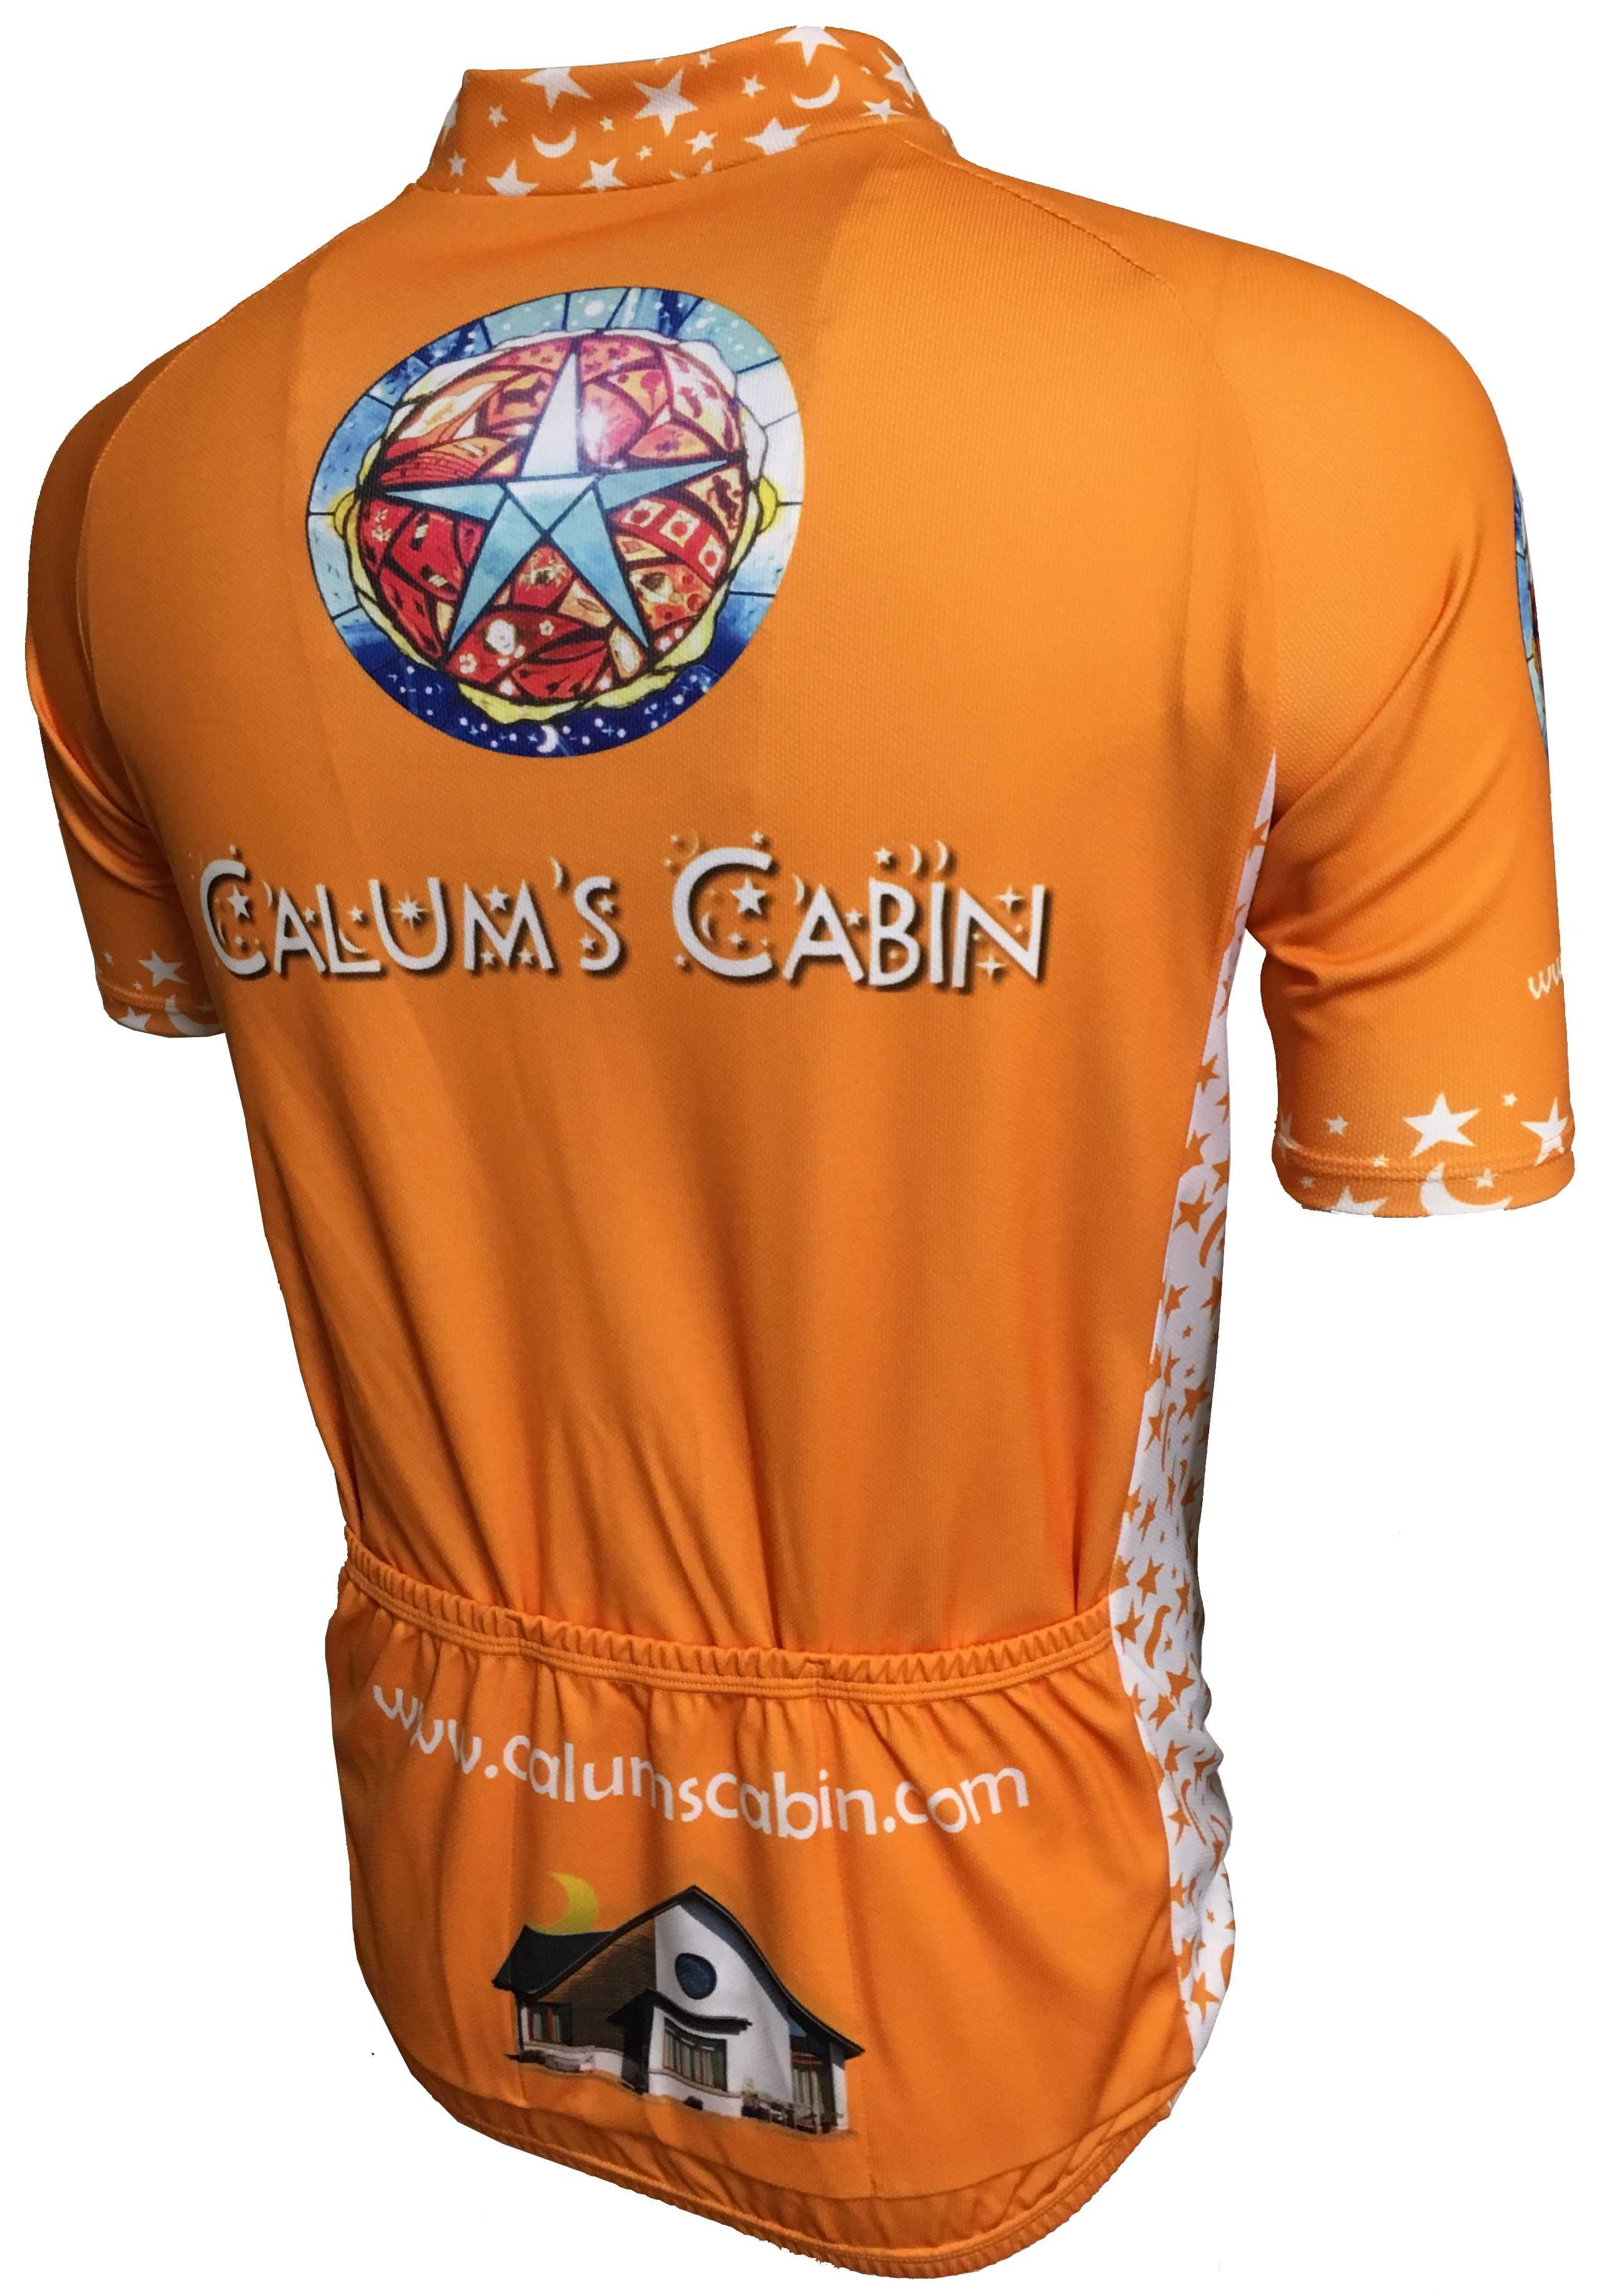 Calum's Cabin Road Cycle Jersey Back